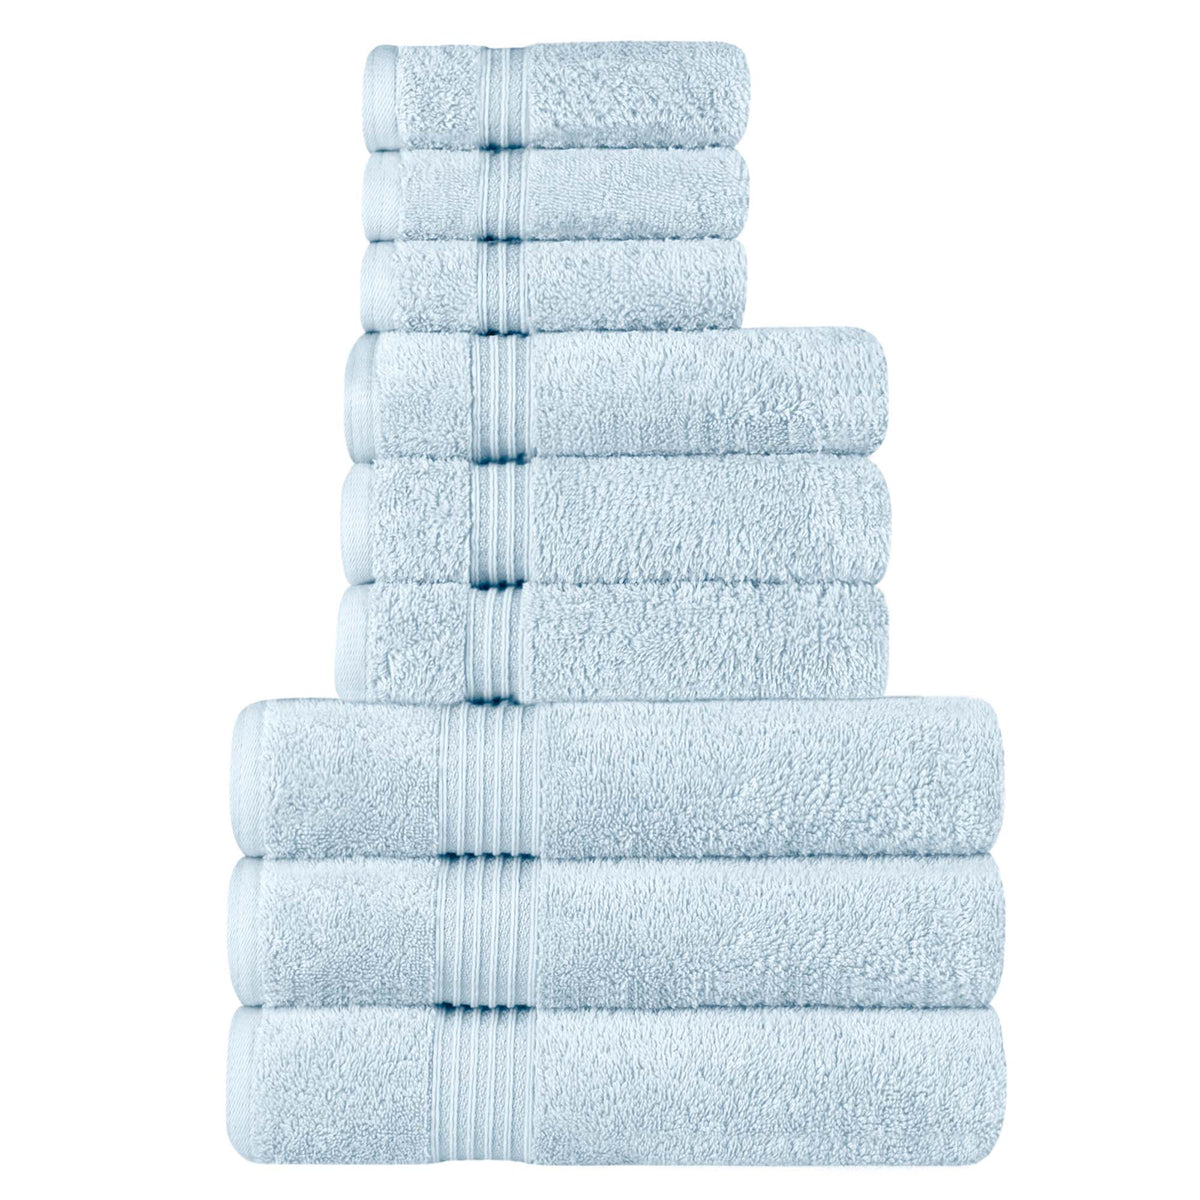 Egyptian Cotton Highly Absorbent Solid 9 Piece Ultra Soft Towel Set - Light Blue